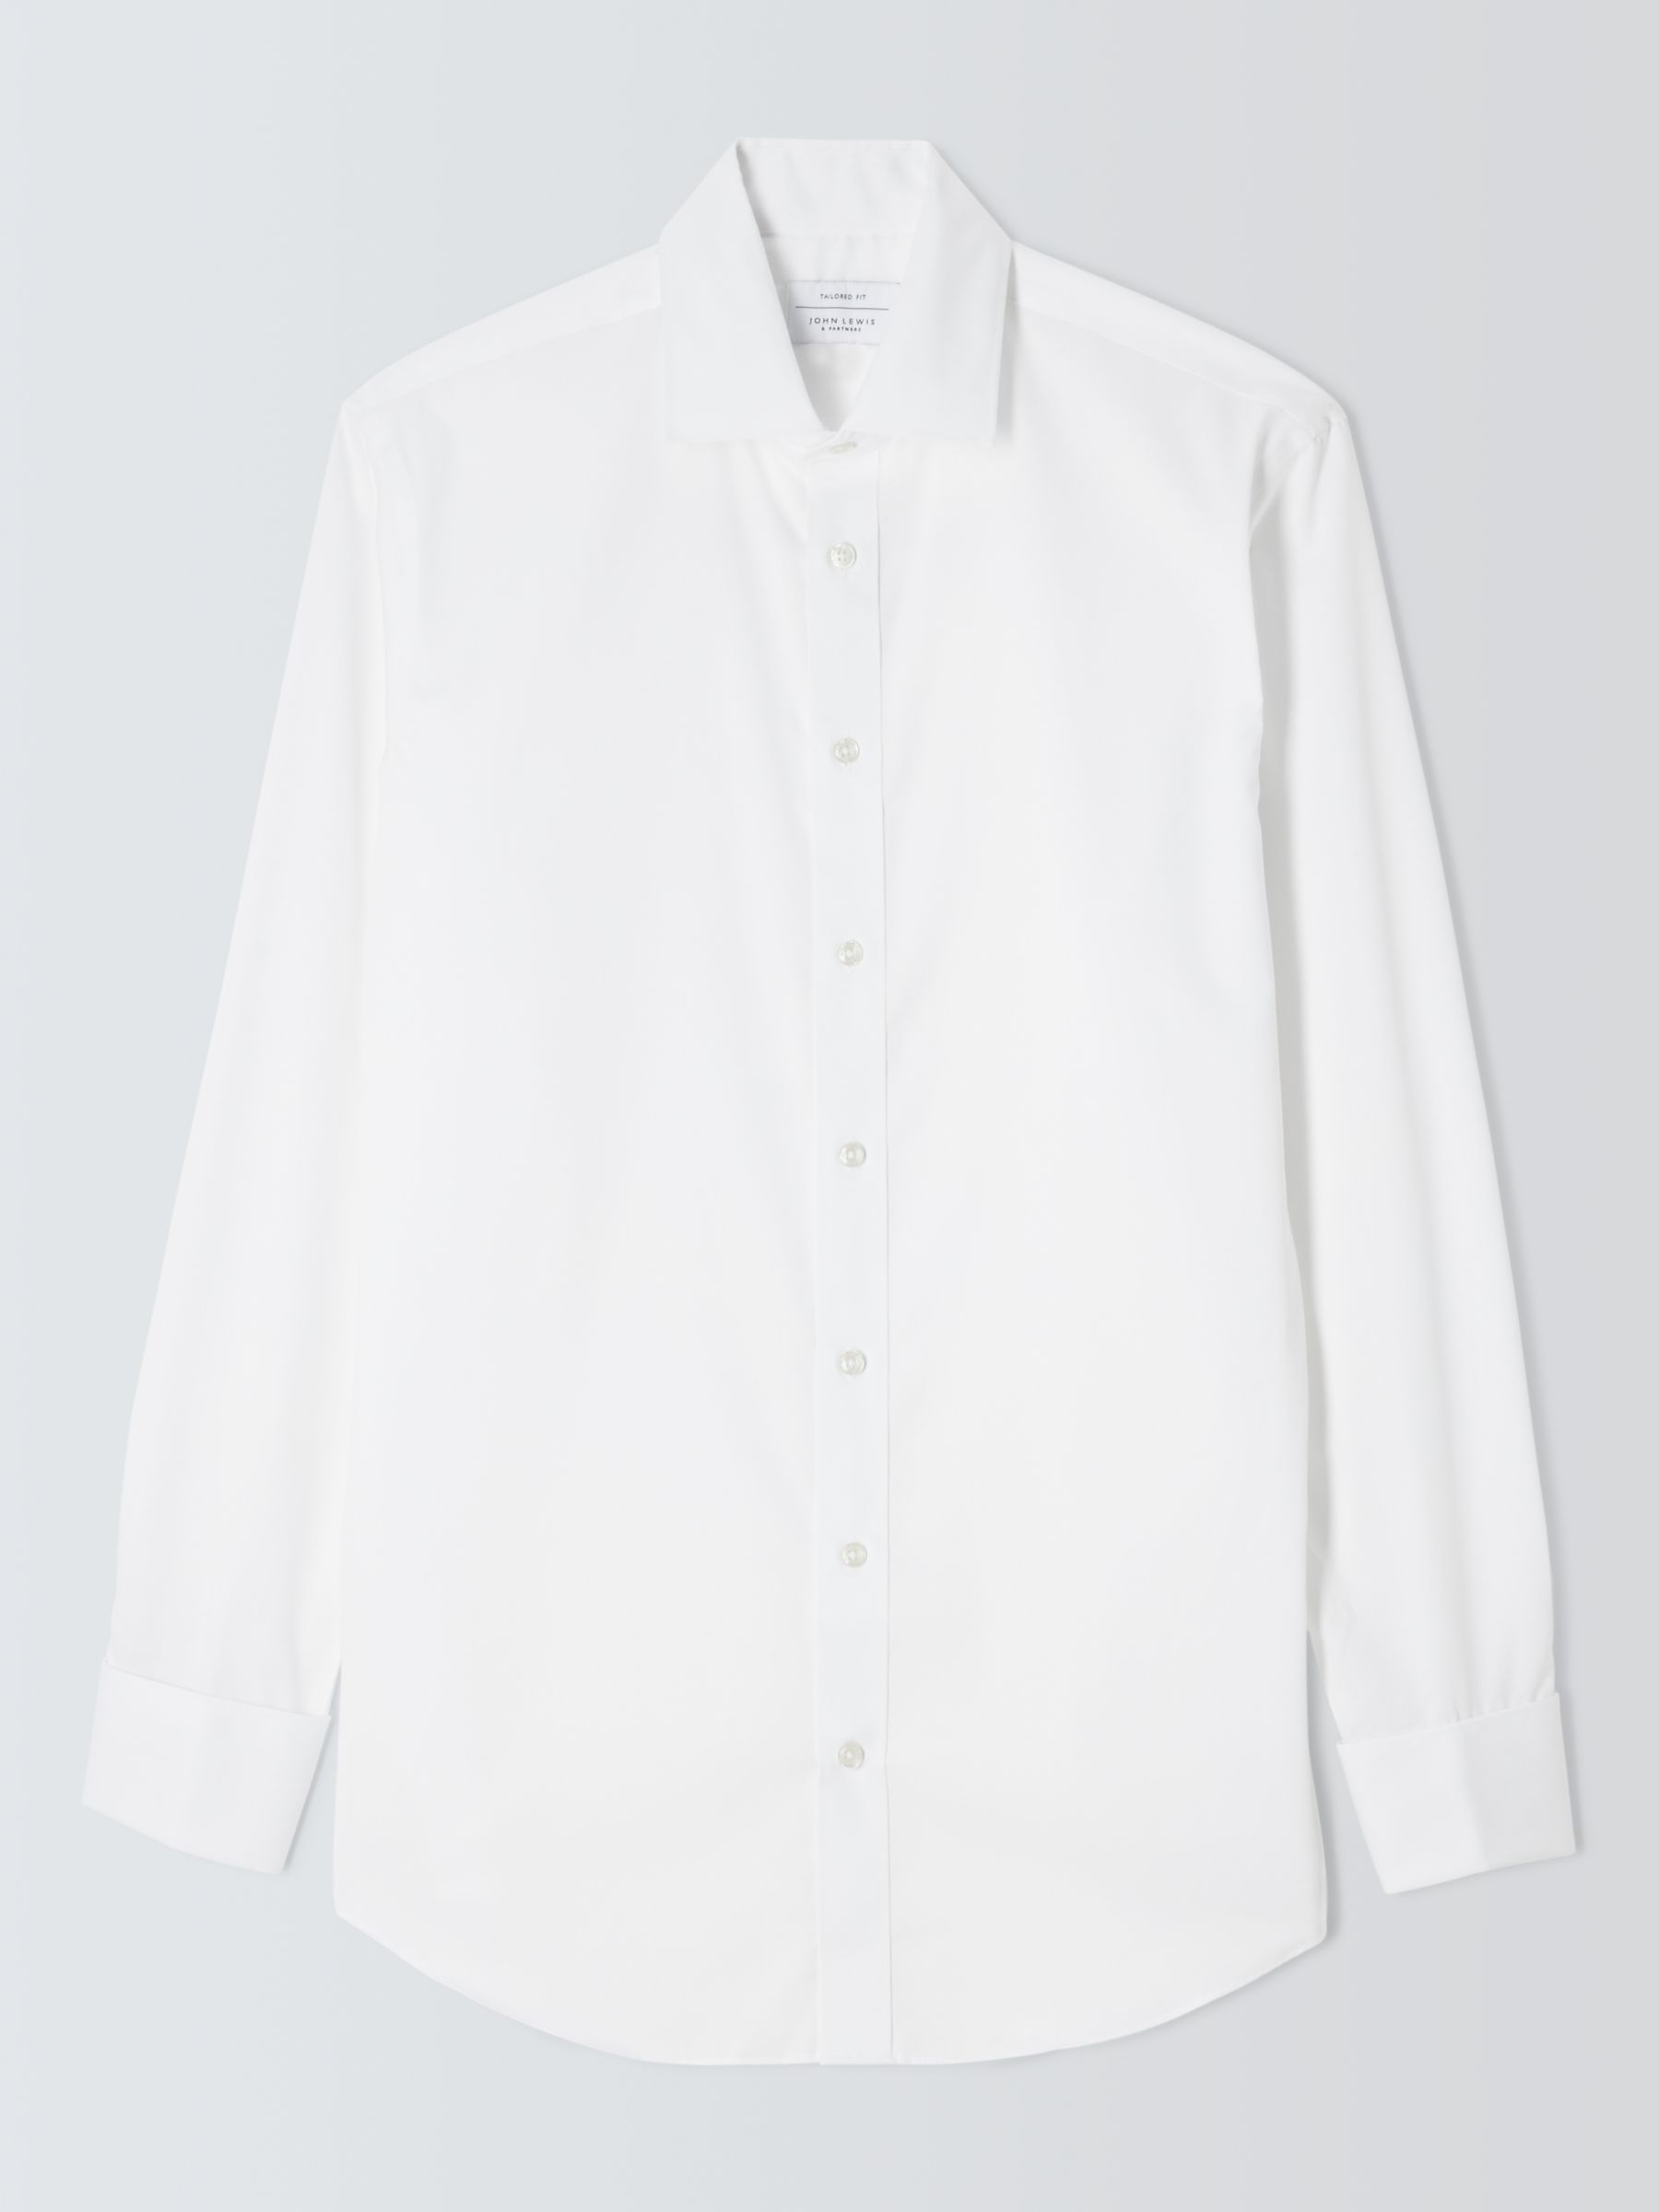 John Lewis Non Iron Twill Double Cuff Tailored Fit Shirt at John Lewis ...